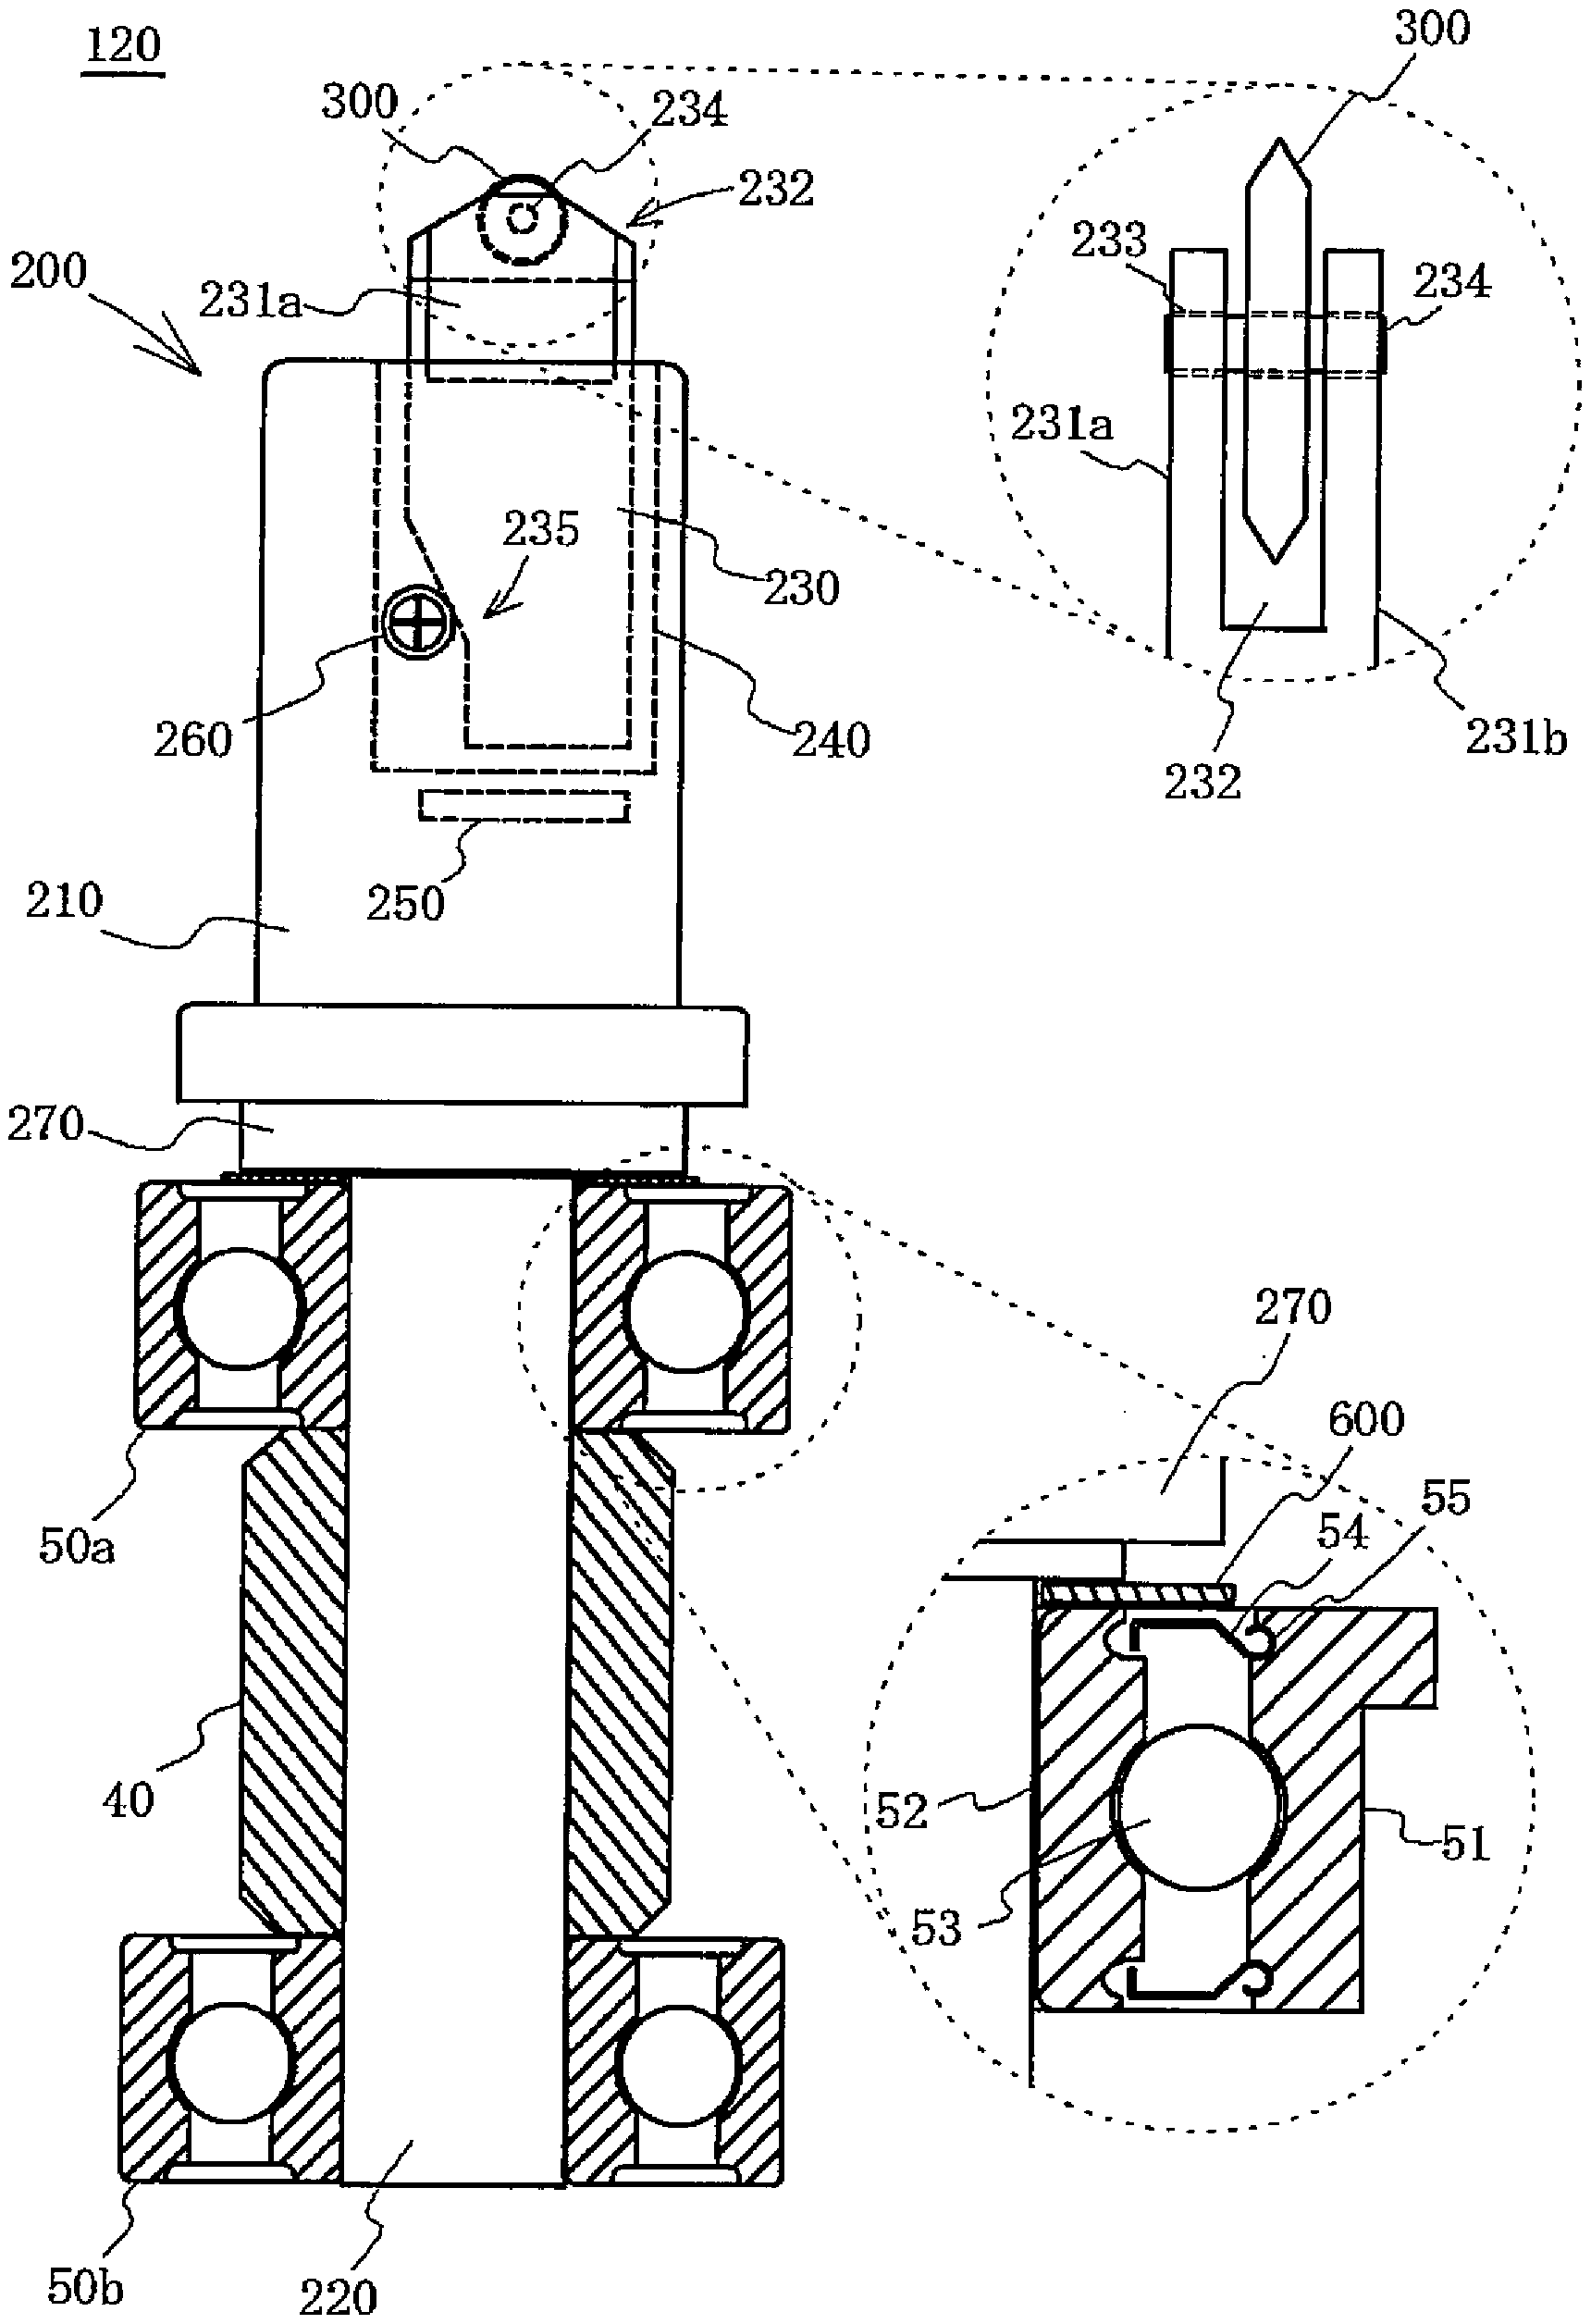 A keeping unit and a line drawing device